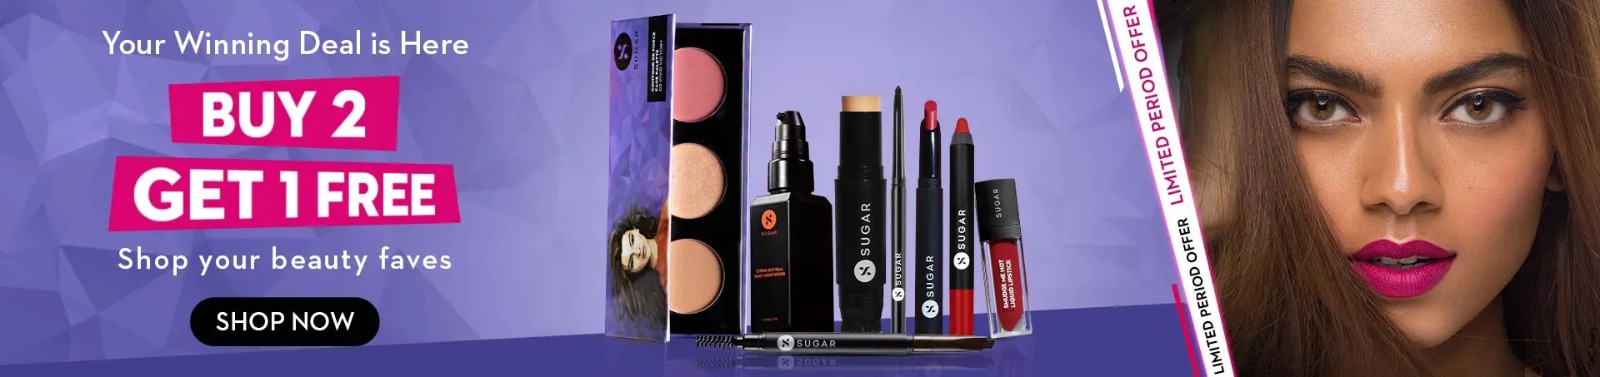 top beauty brands offer image 1